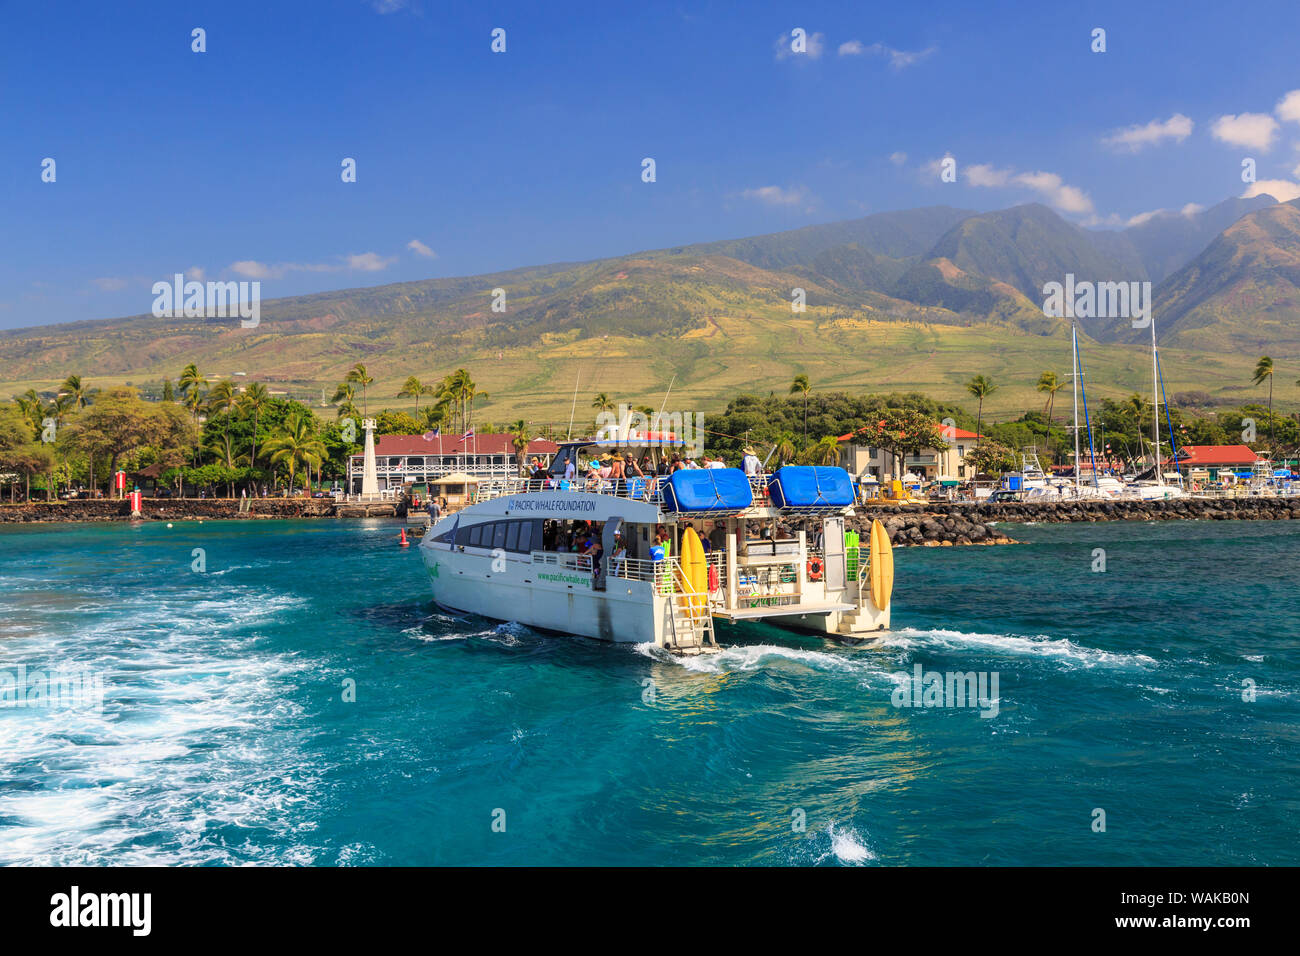 Maui, Hawaii, USA. Whale-watching boat. (Editorial Use Only) Stock Photo